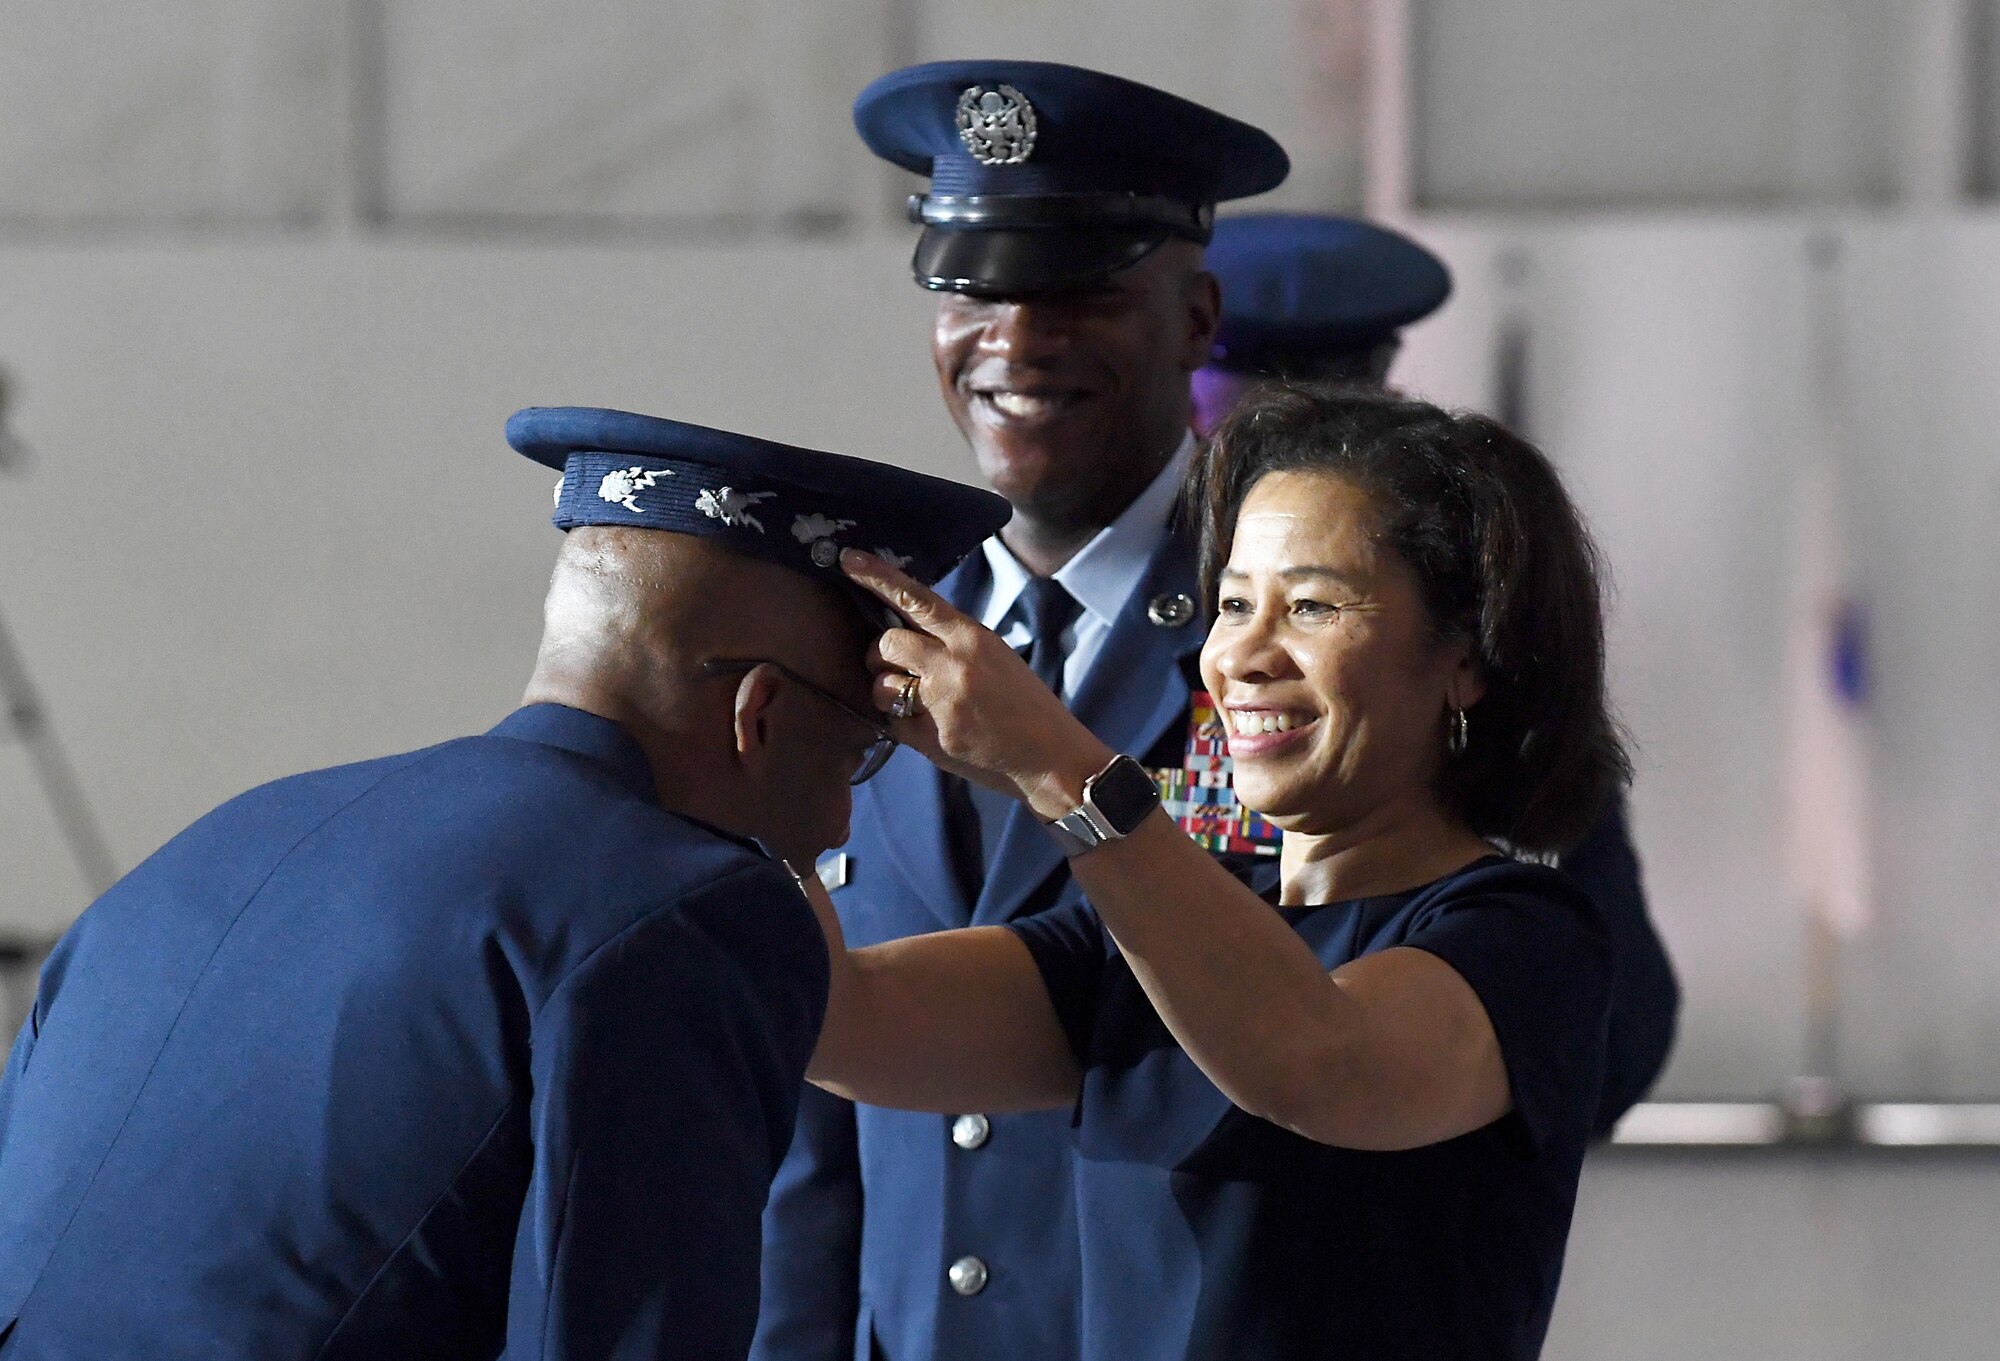 Sharene Brown, spouse of incoming Air Force Chief of Staff Gen. Charles Q. Brown Jr., presents the official Air Force Chief of Staff service cap to her husband during the CSAF transition ceremony at Joint Base Andrews, Md., Aug. 6, 2020. Brown is the 22nd Chief of Staff of the Air Force. (U.S. Air Force photo by Staff Sgt. Chad Trujillo)